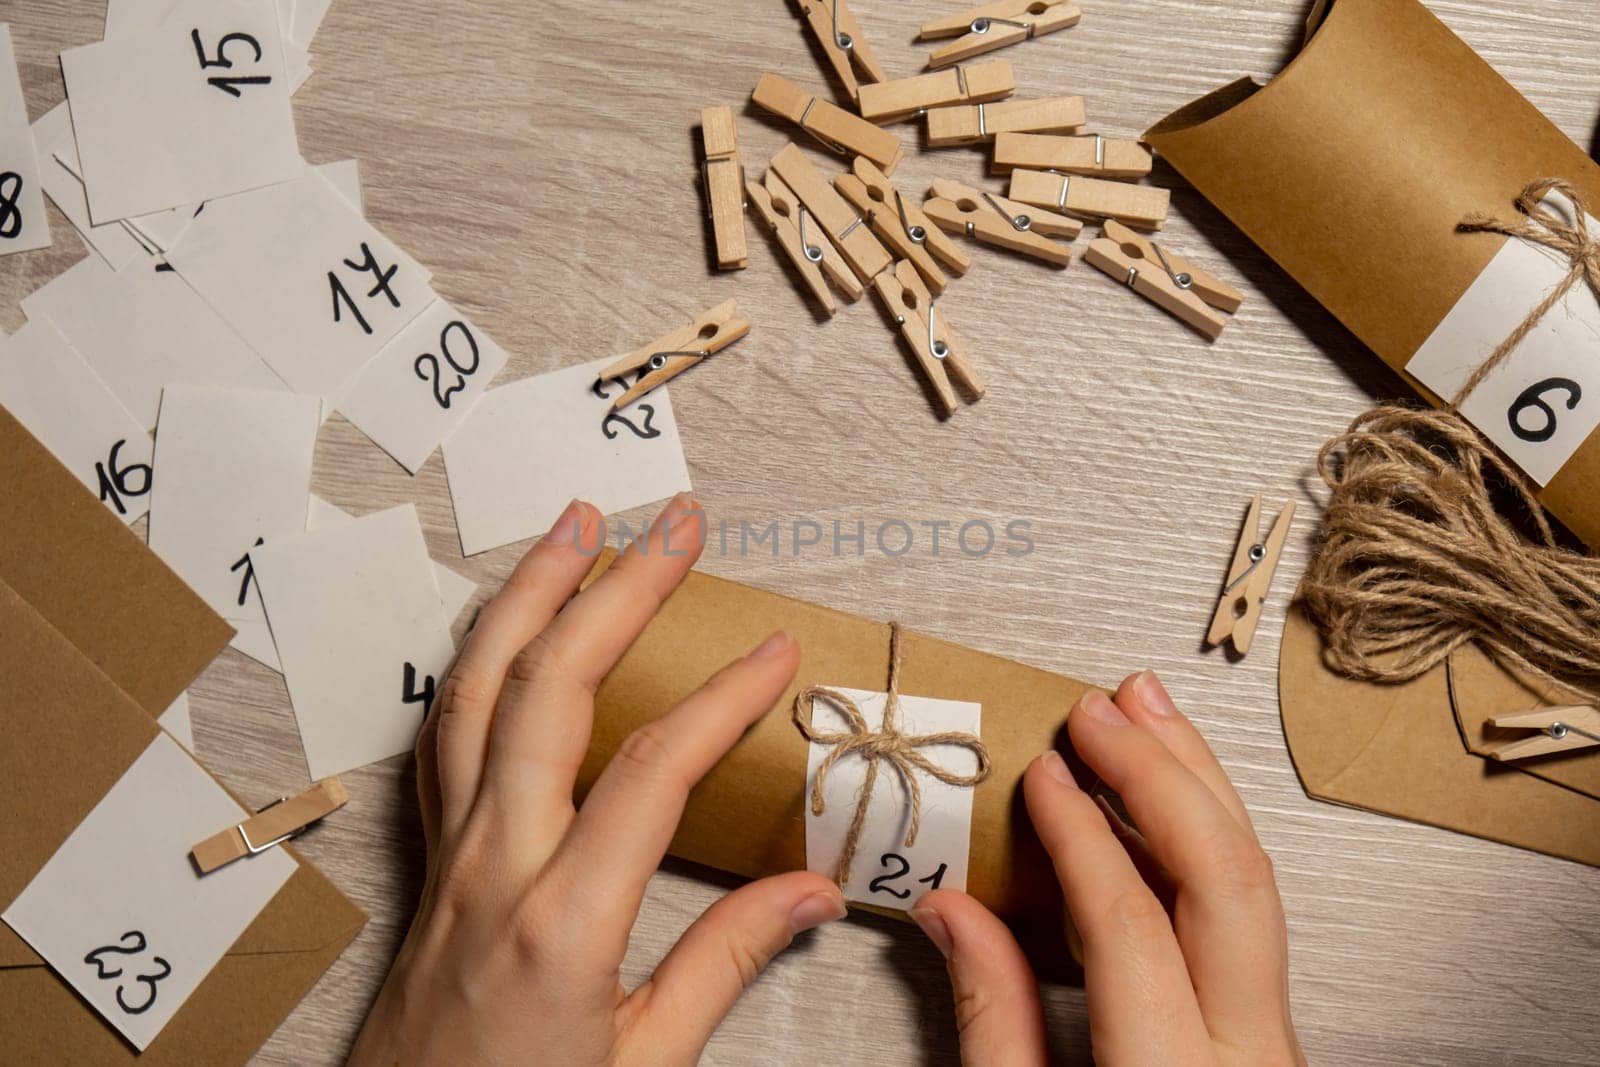 Unrecognizable young woman sticks number on craft bag, fastens with clothespin. Female making kraft paper for homemade advent calendar Made with your own hands step by step DIY crafts do it yourself. Preparation to christmas concept. Seasonal activities for children family winter holidays. Eco friendly presents gifts. open the package every day